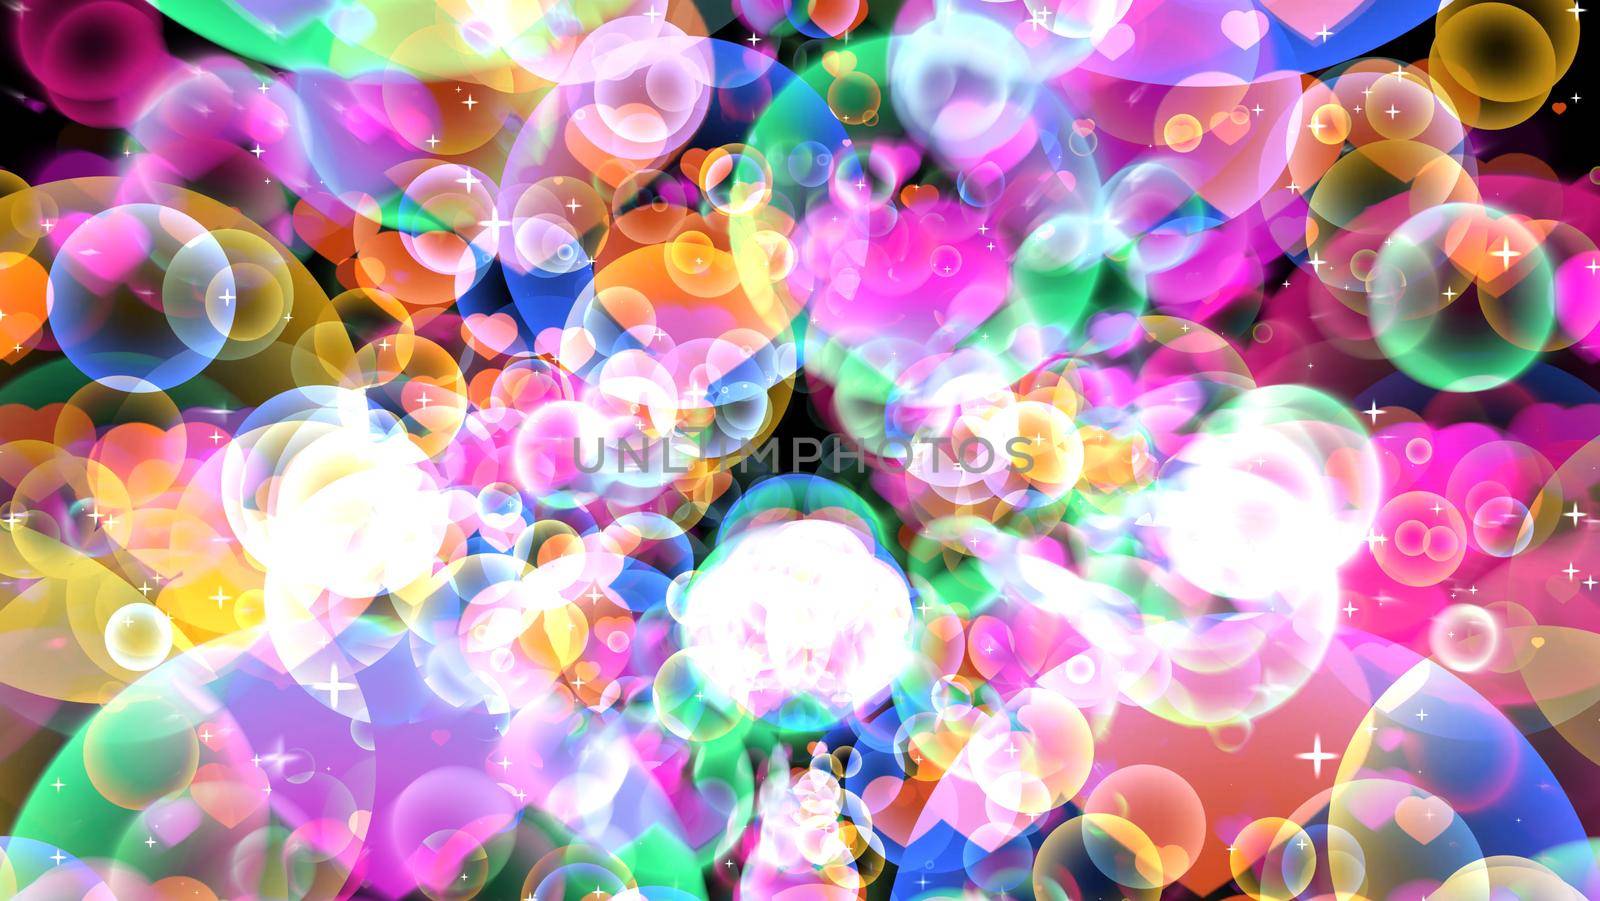 Rainbow reflection bubbles with hearts floating on black background by Darkfox